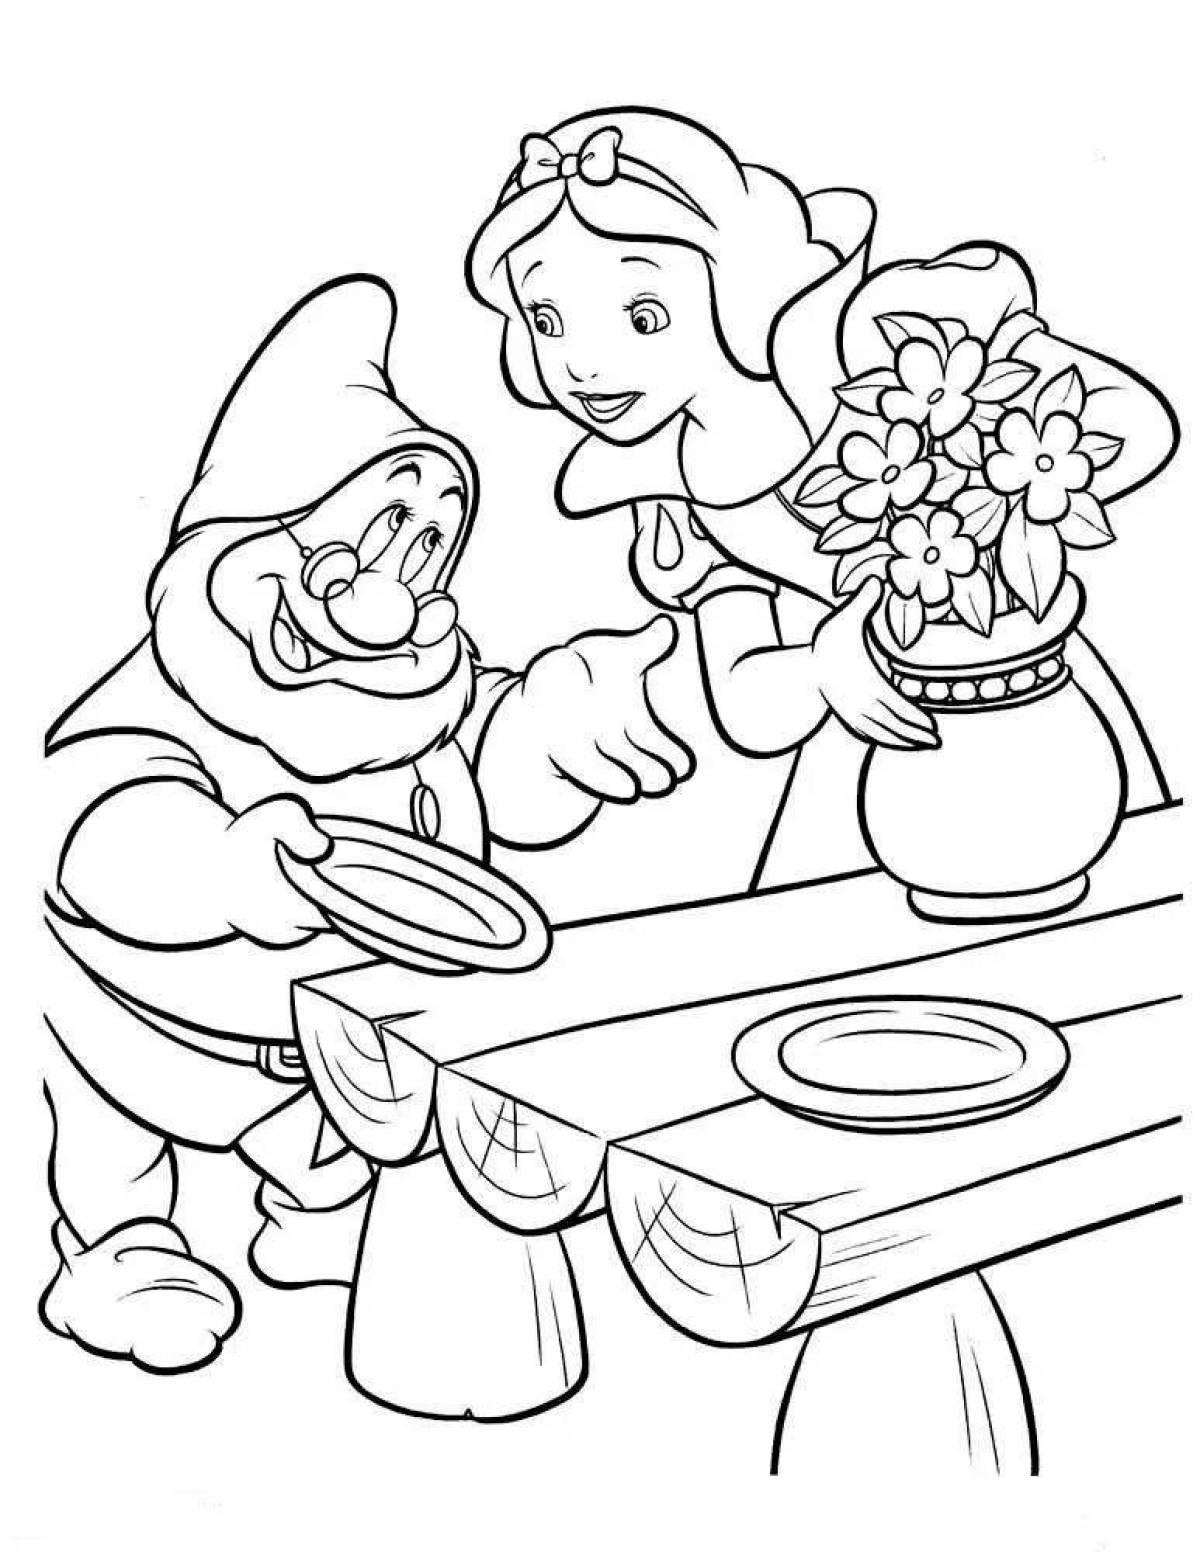 Sparkly 7 dwarfs coloring book